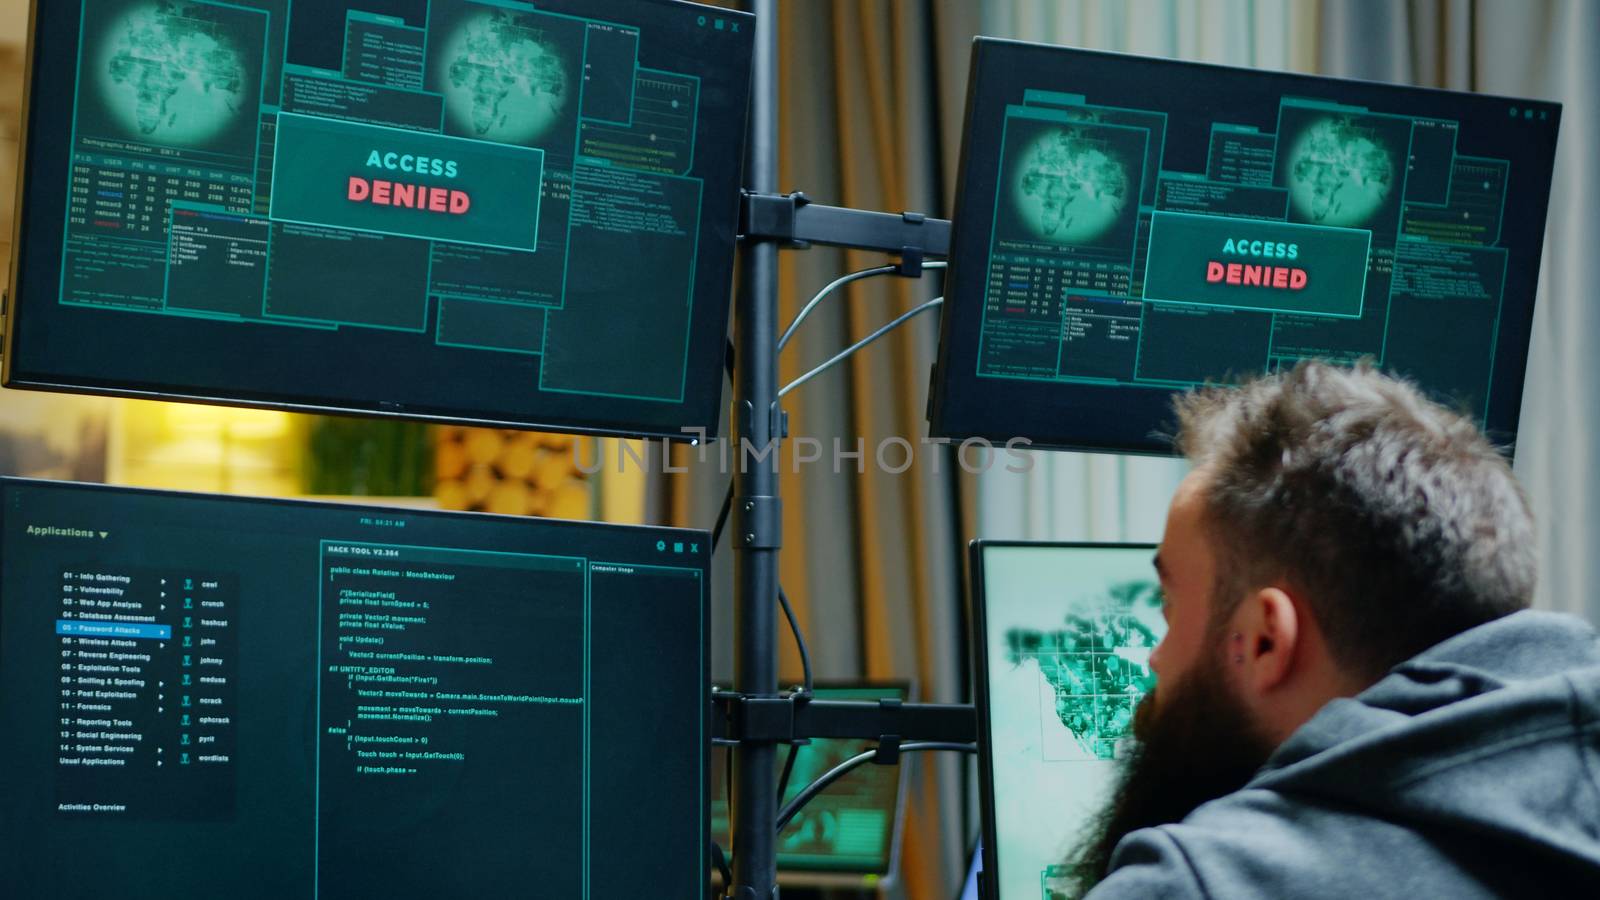 Zoom in shot of male hacker trying to hack a firewall and gets access denied.